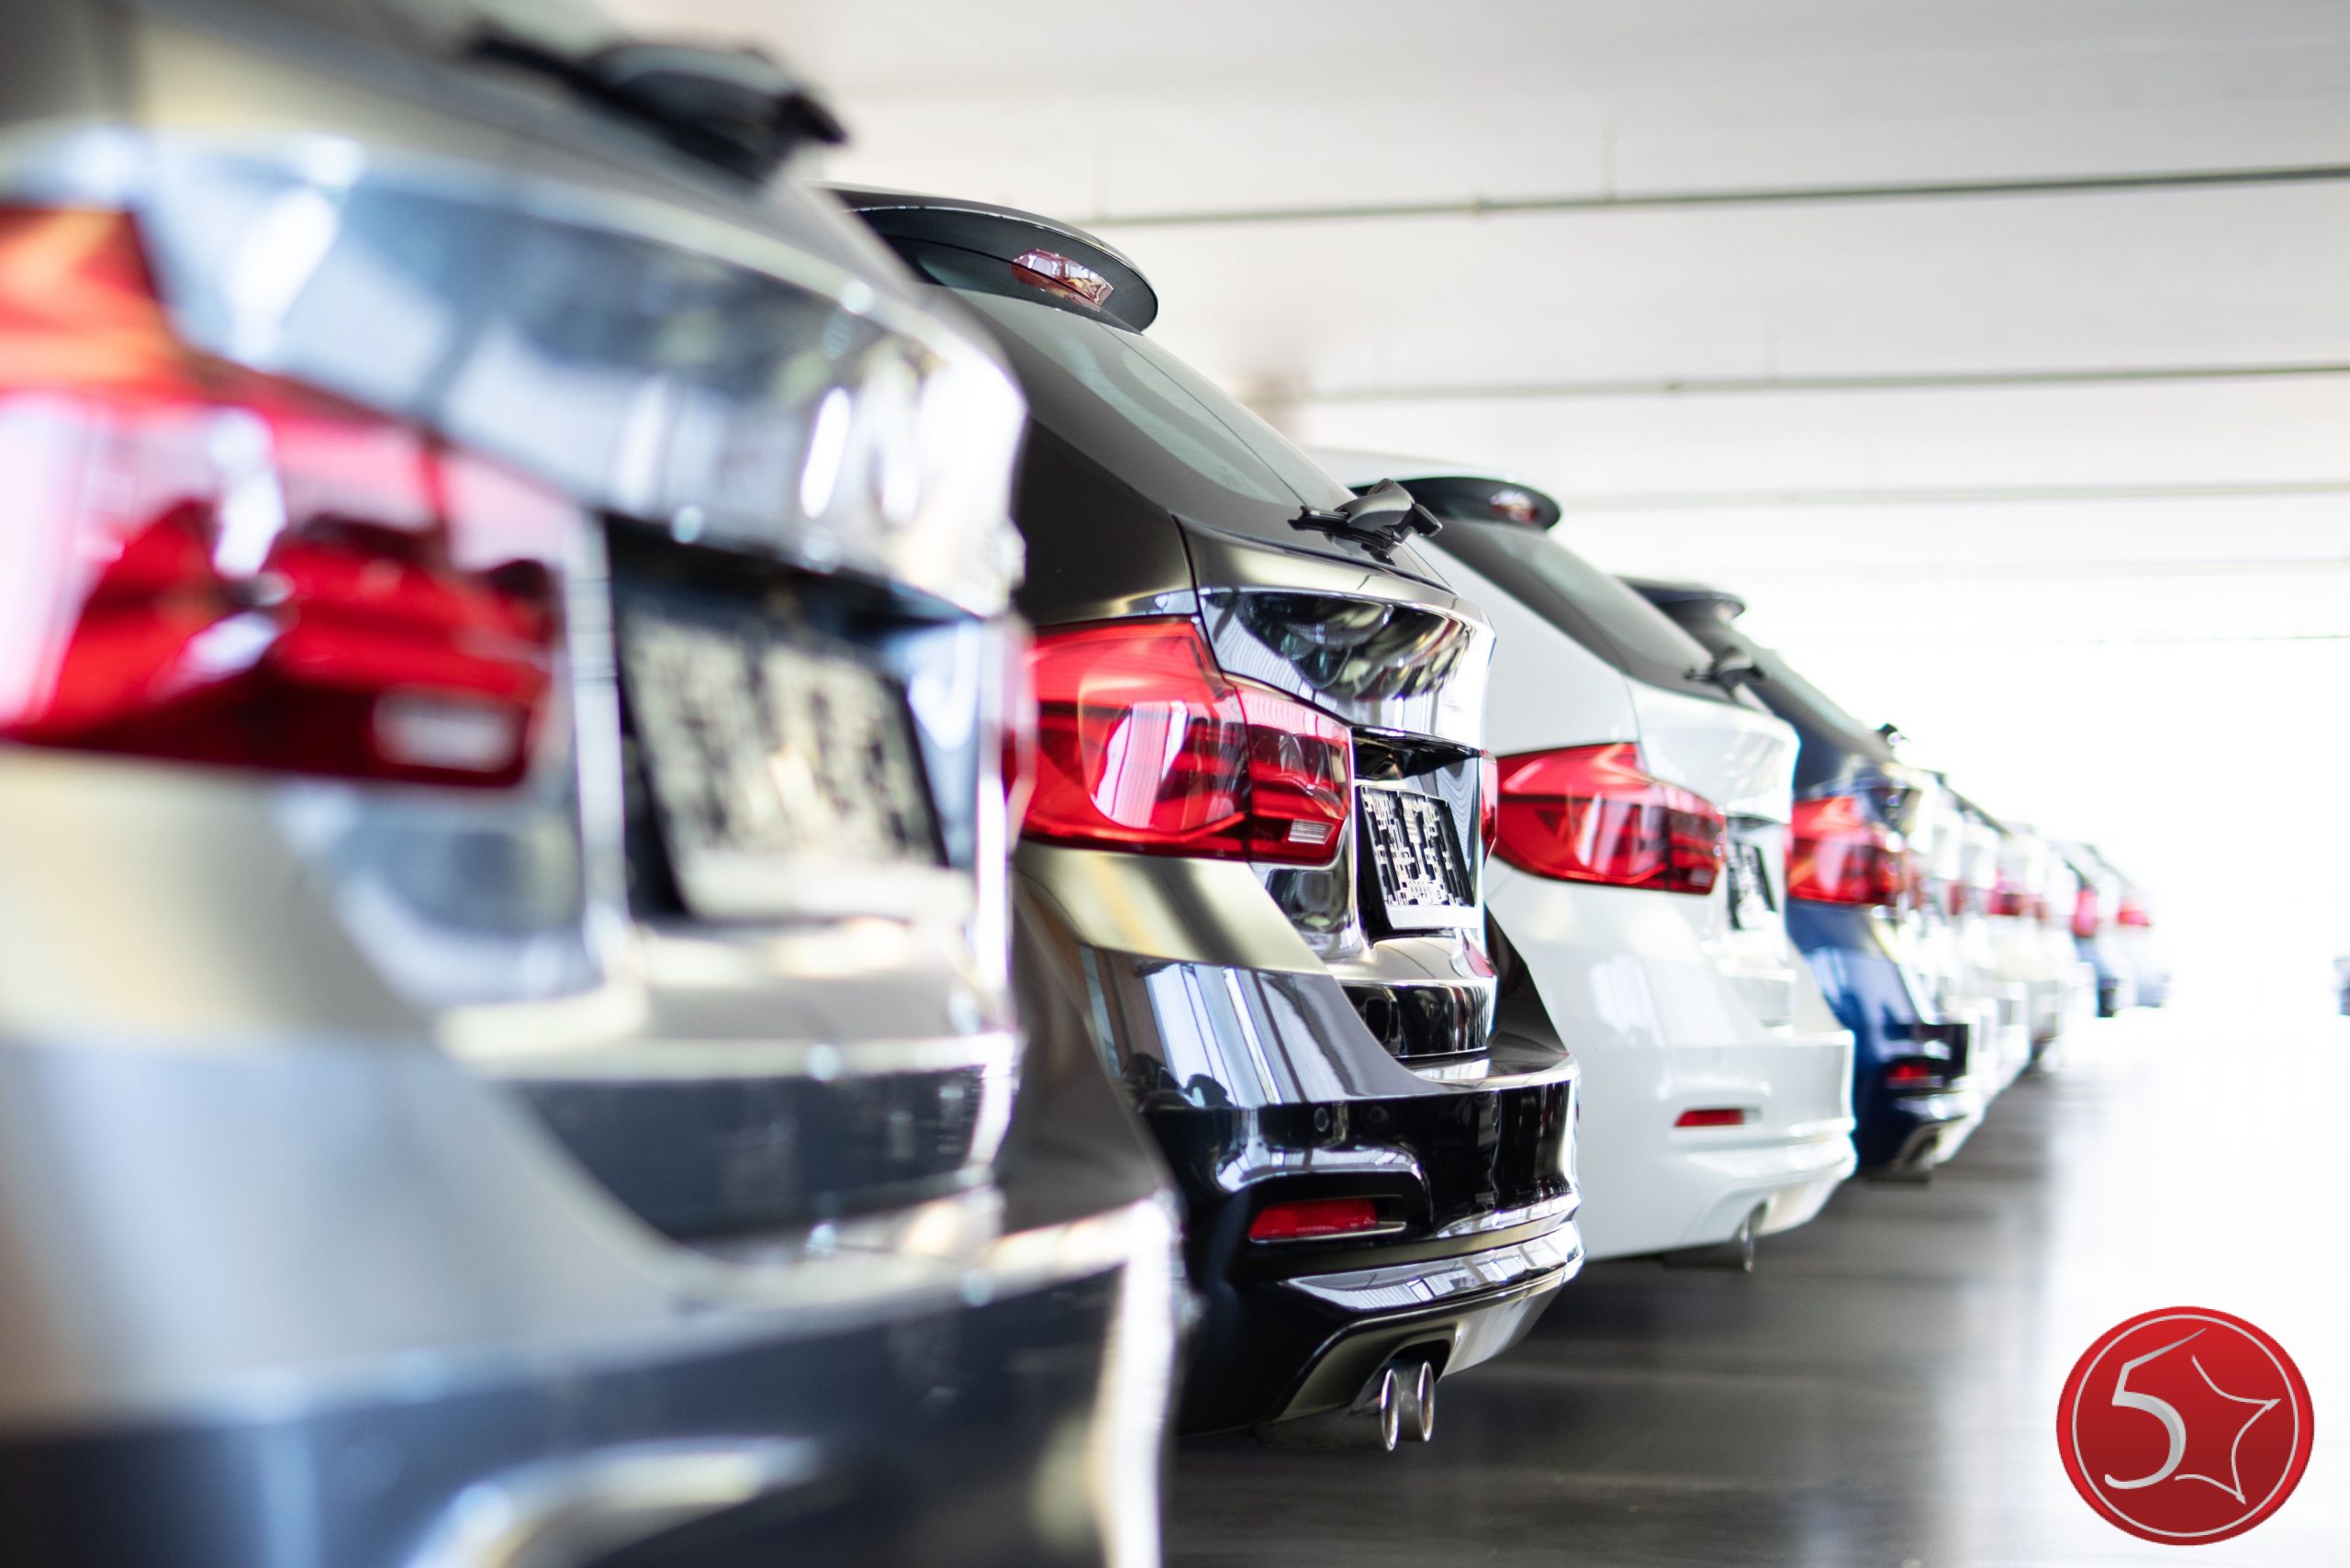 Enjoy A Memorable Auto Dealer Experience In St. Peters